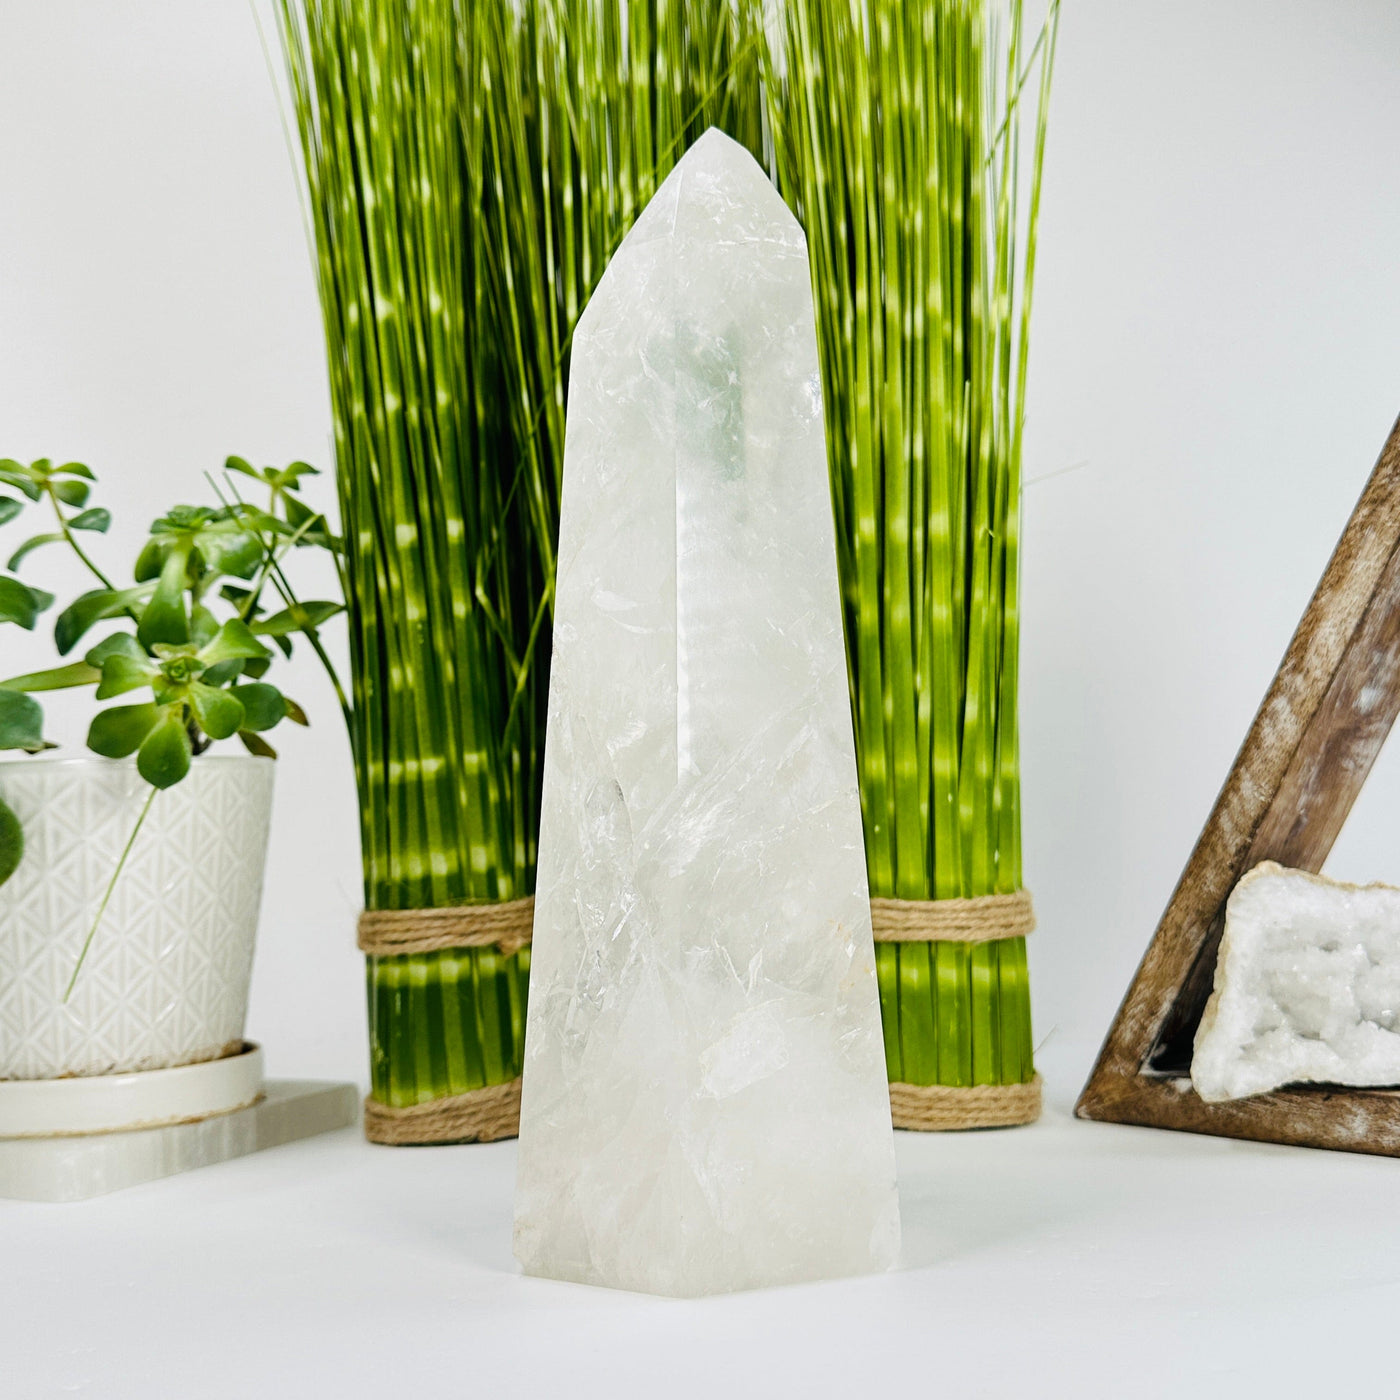 Crystal Quartz Polished Tower with decorations in the background